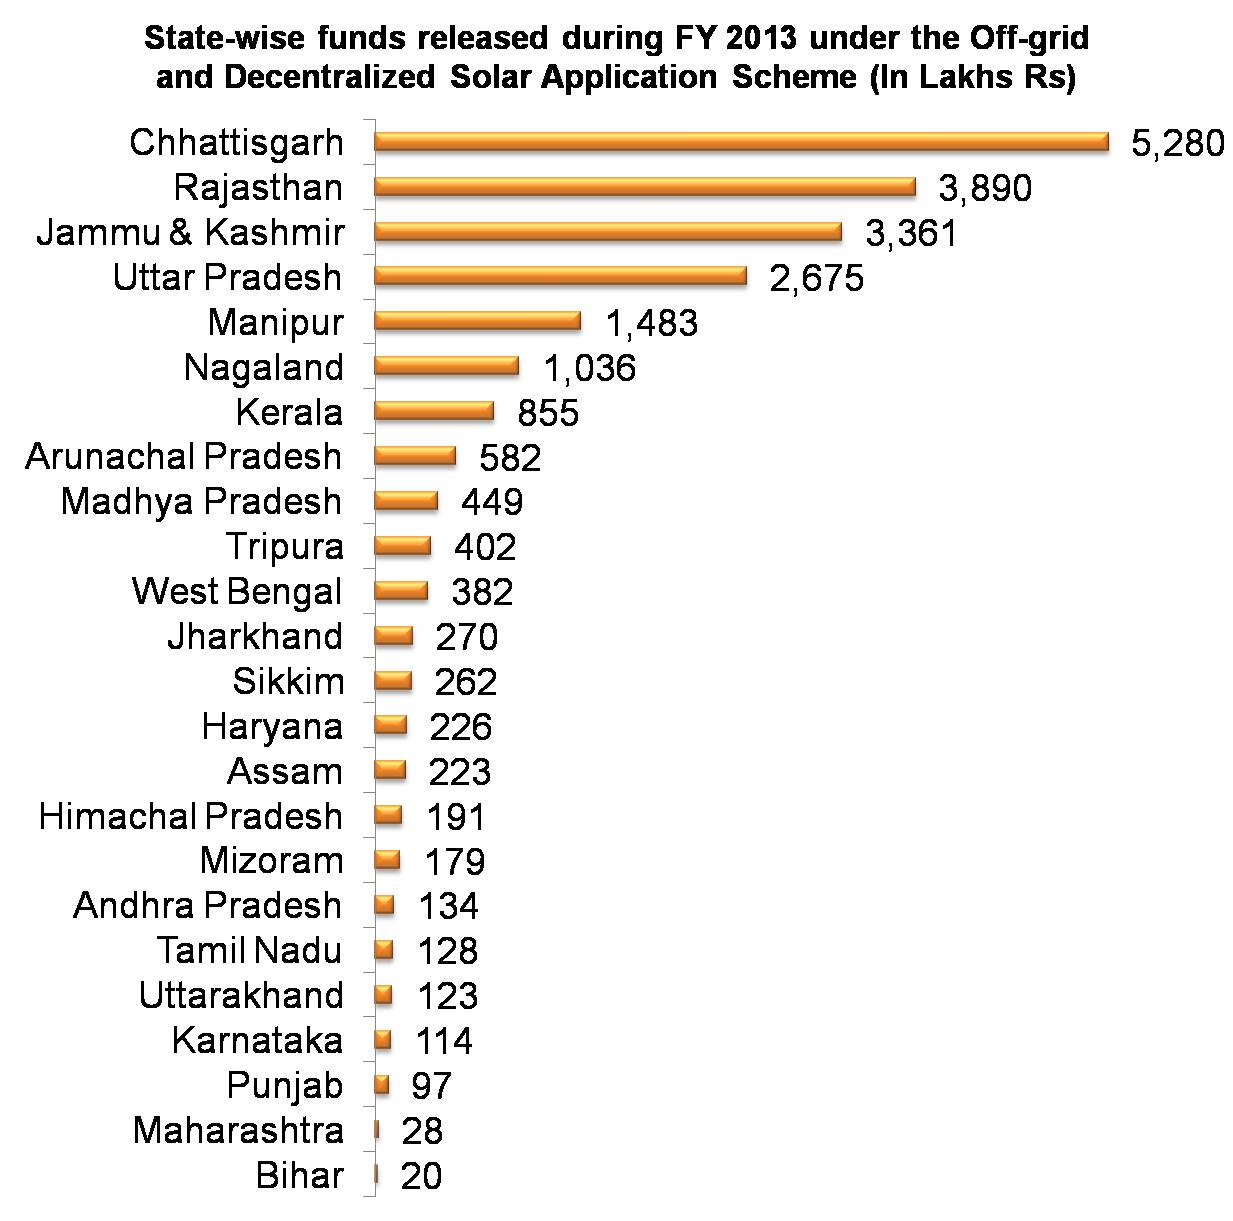 State-wise funds released during FY 2013 under the Off-grid and Decentralized Solar Application Scheme _MNRE